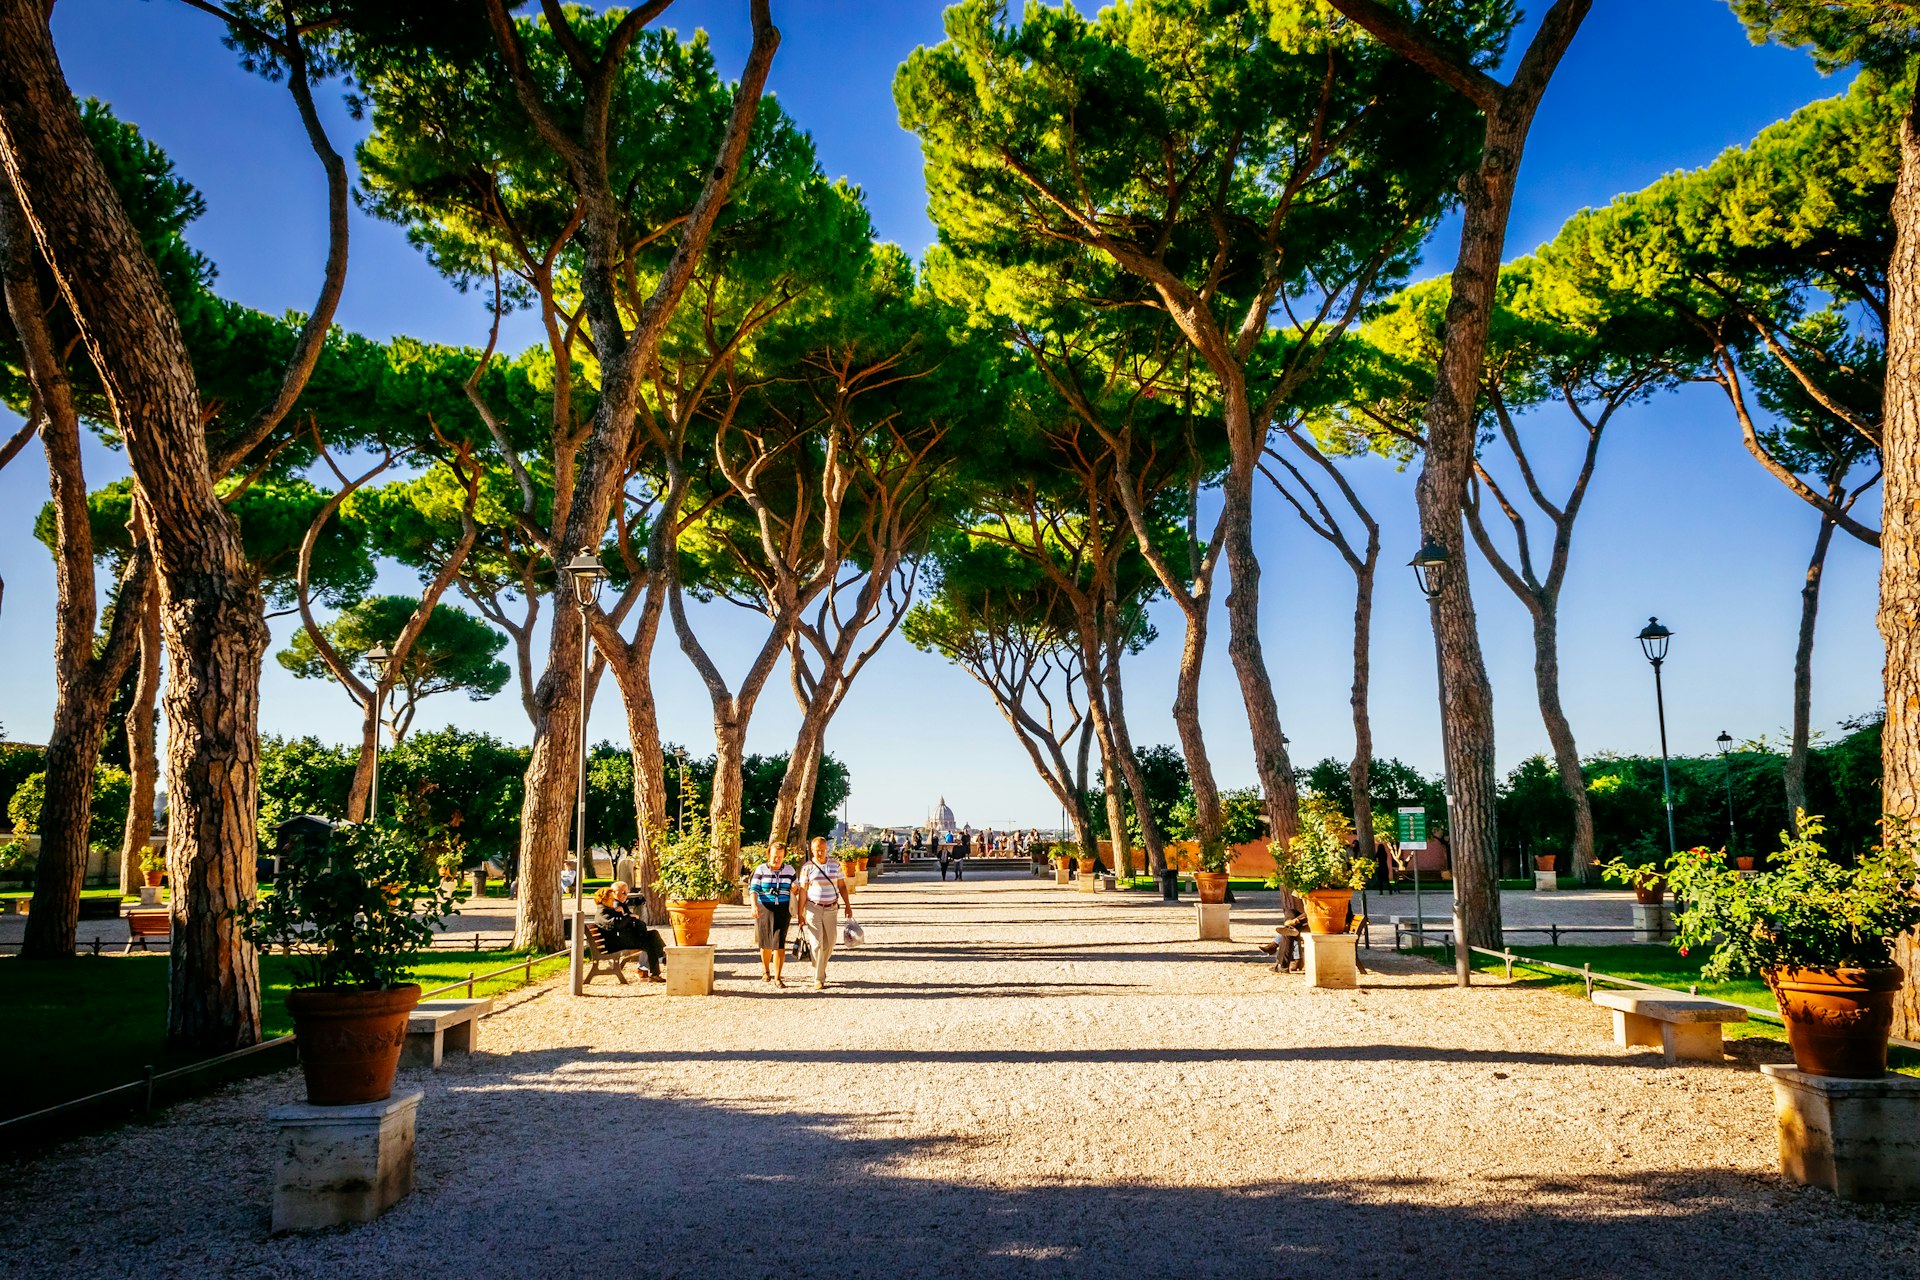 A pathway lined with trees that have bent over it; at the end is the iconic Roman skyline including a large dome